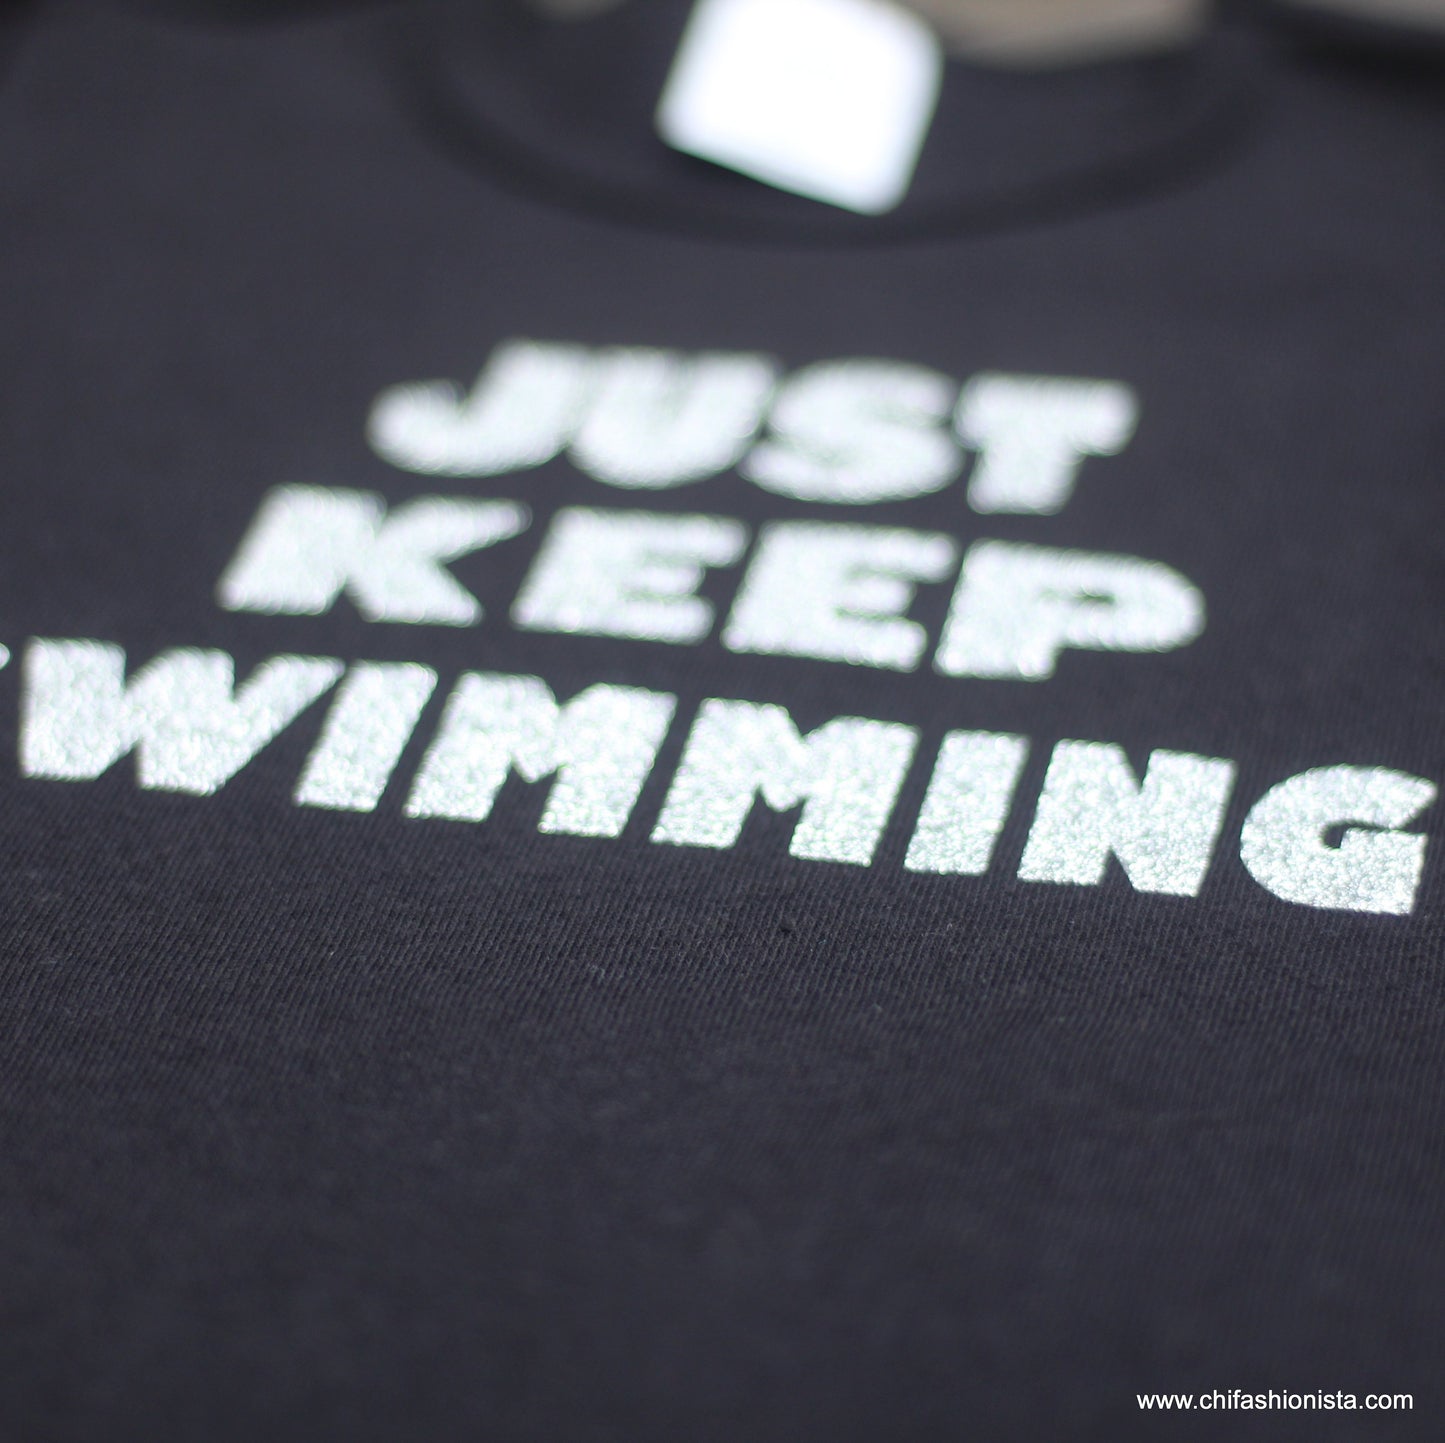 Handcrafted Children's Clothing, Clothing for Children and Parents, Just Keep Swimming Shirt, chi-fashionista